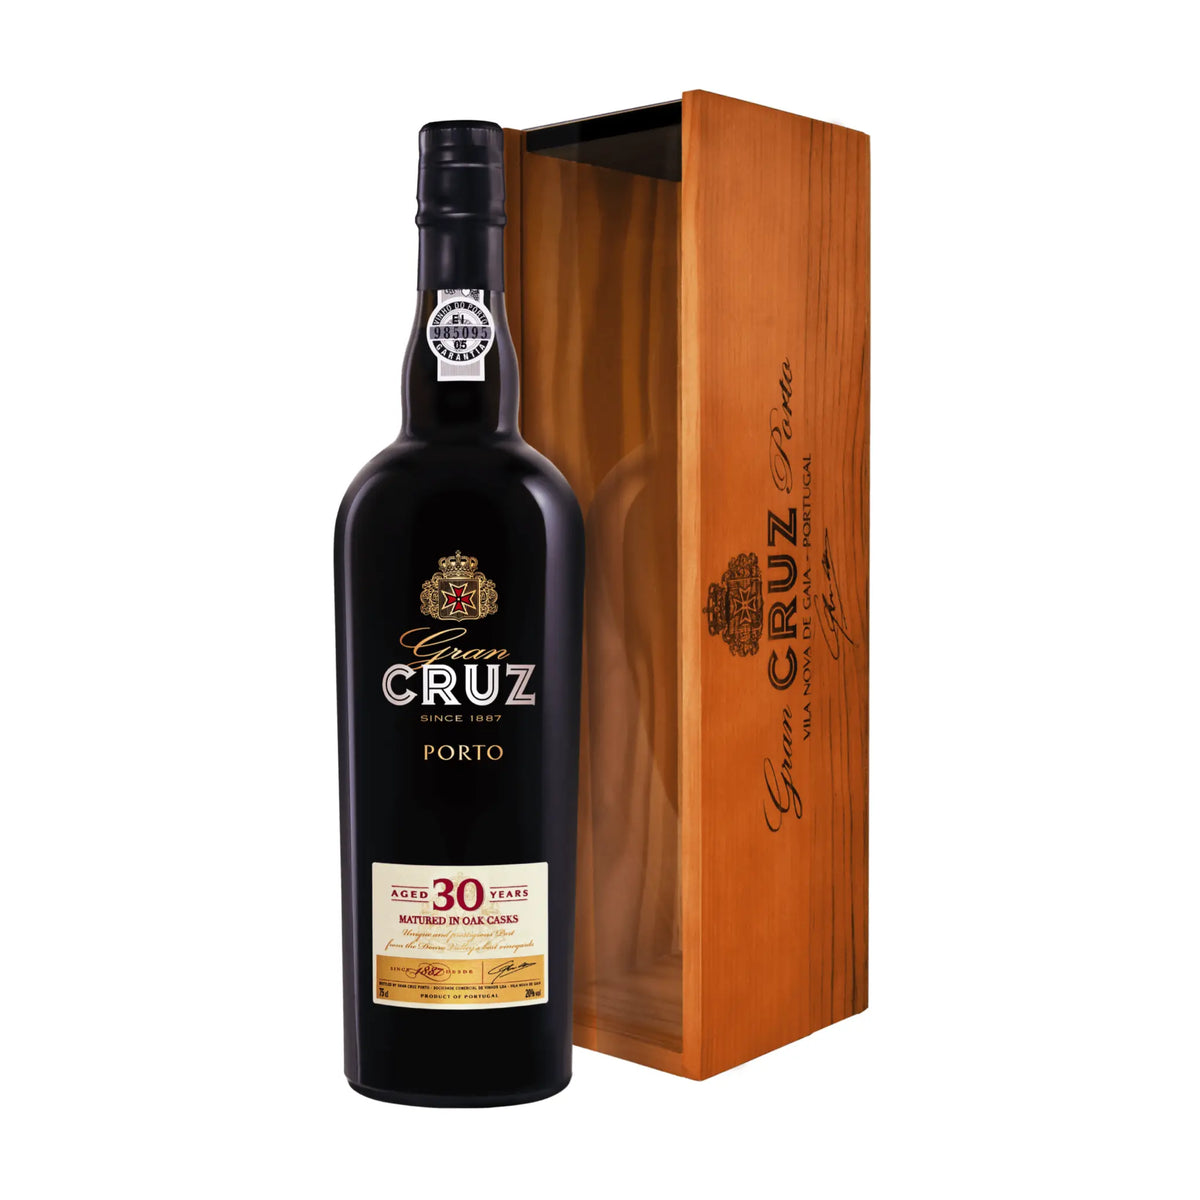 Cruz Port-Rotwein-Cuvée-Douro-Portugal-30 Year Old Port in Holzkiste-WINECOM